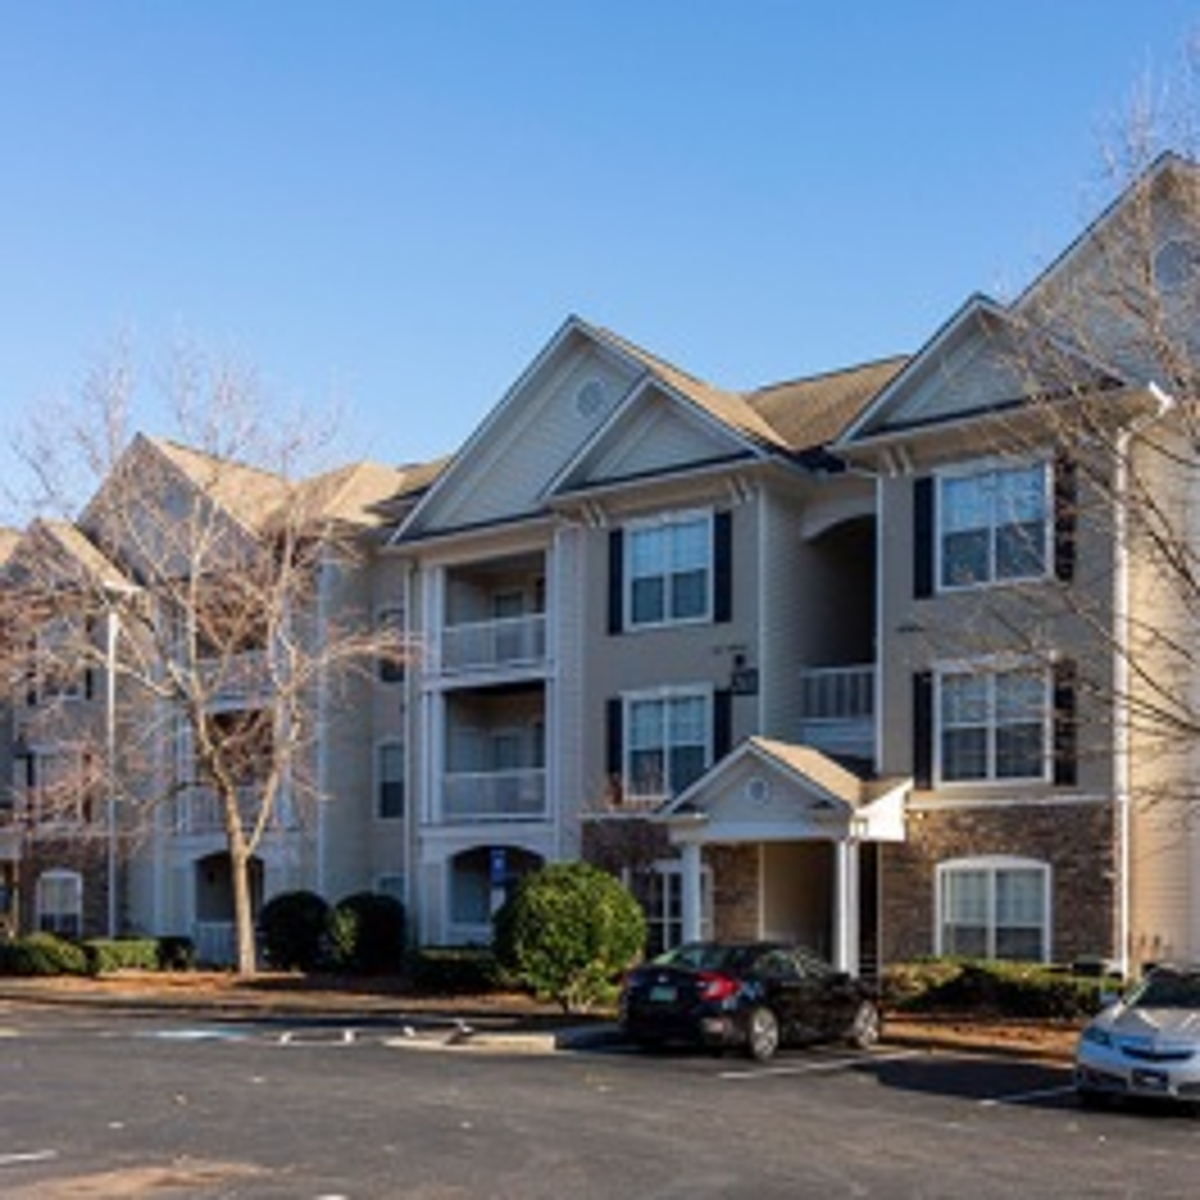 McCANN REALTY PARTNERS ACQUIRES TWO APARTMENT ASSETS TOTALING 444 UNITS IN ATLANTA, GA